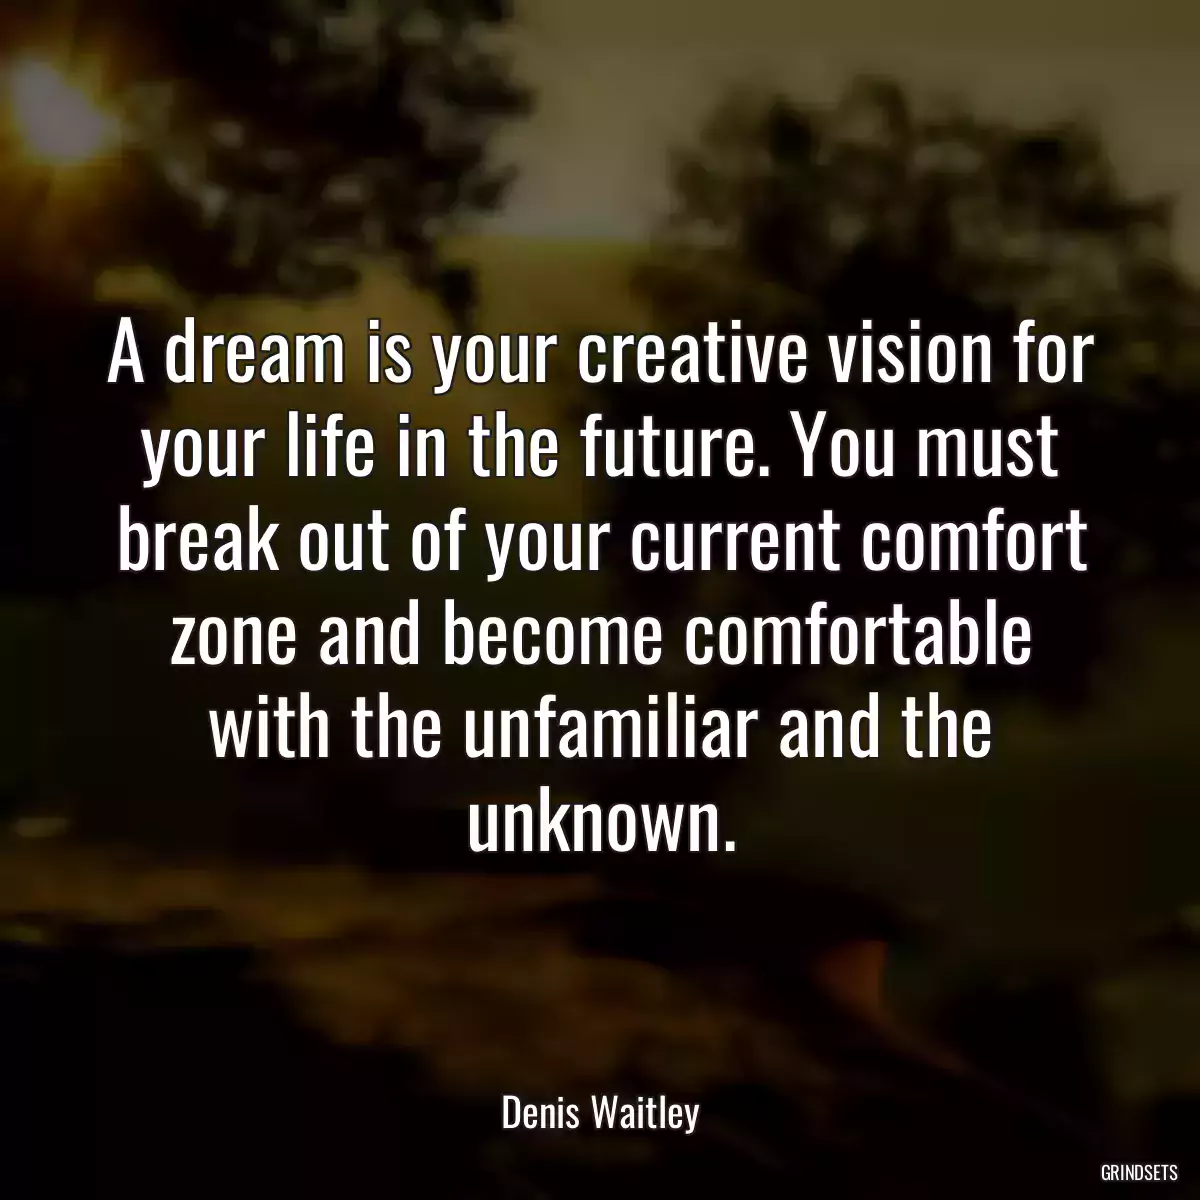 A dream is your creative vision for your life in the future. You must break out of your current comfort zone and become comfortable with the unfamiliar and the unknown.